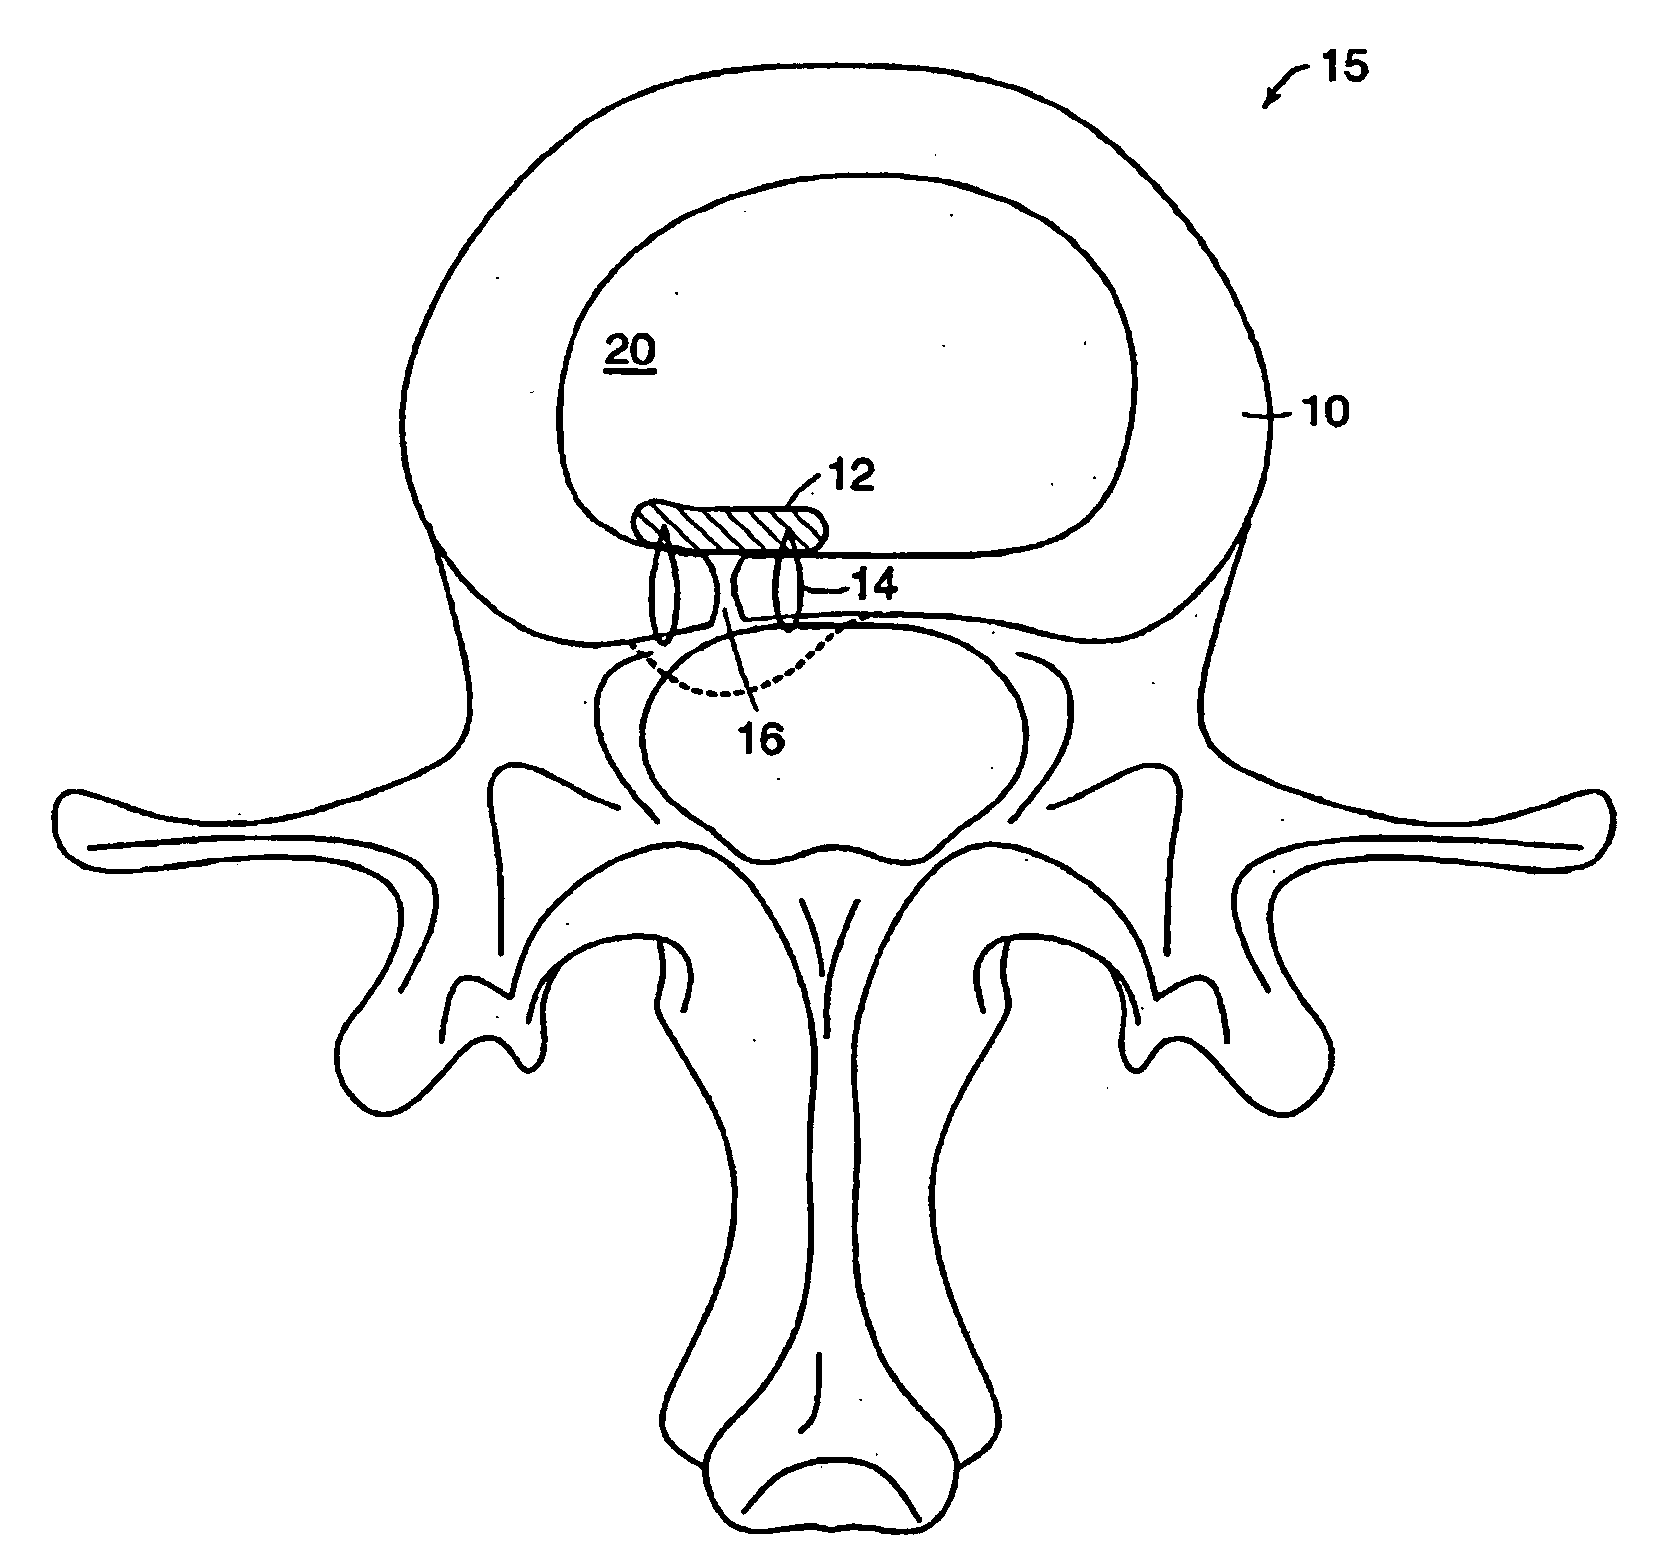 Method of reducing spinal implant migration